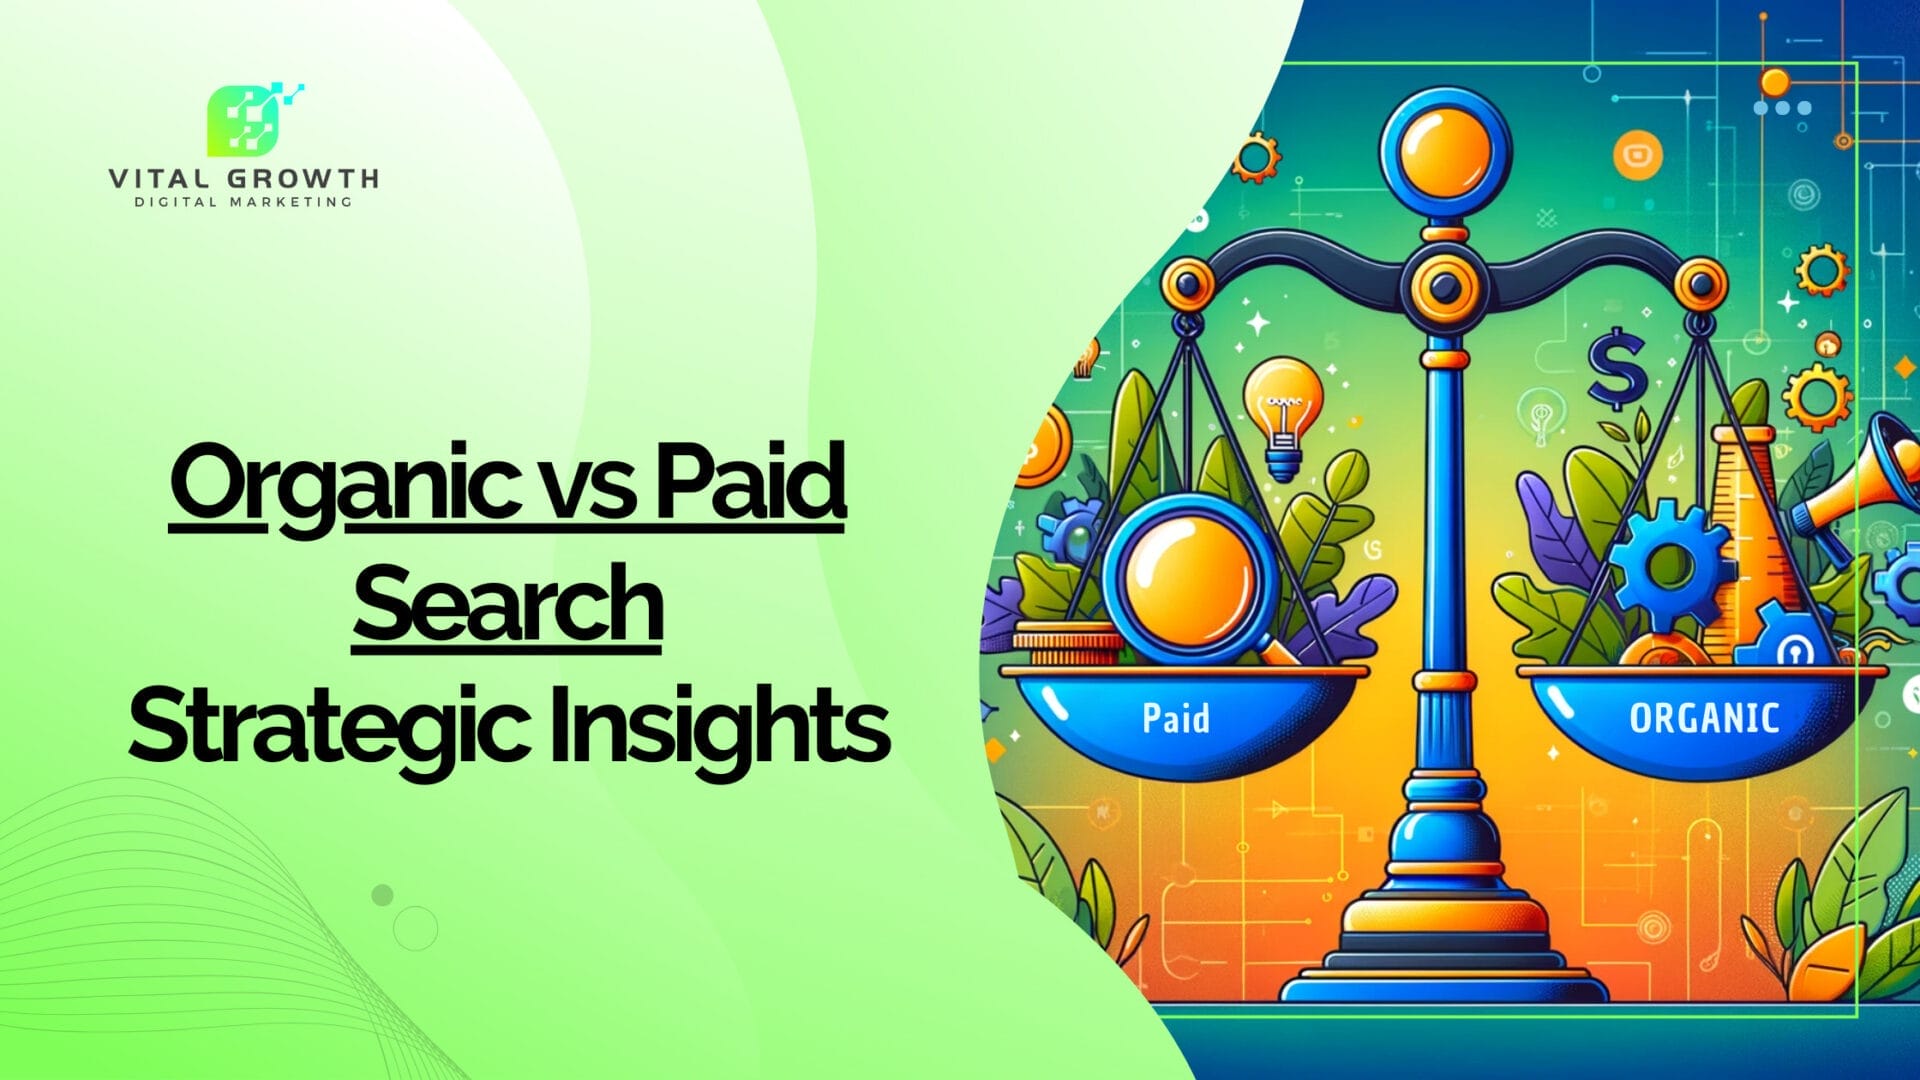 Illustration of a balance scale depicting Organic vs Paid Search, with paid search symbols like a magnifying glass and plant on one side, and organic search icons such as coins and a megaphone on the other, symbolizing the equilibrium between the two strategies in digital marketing.